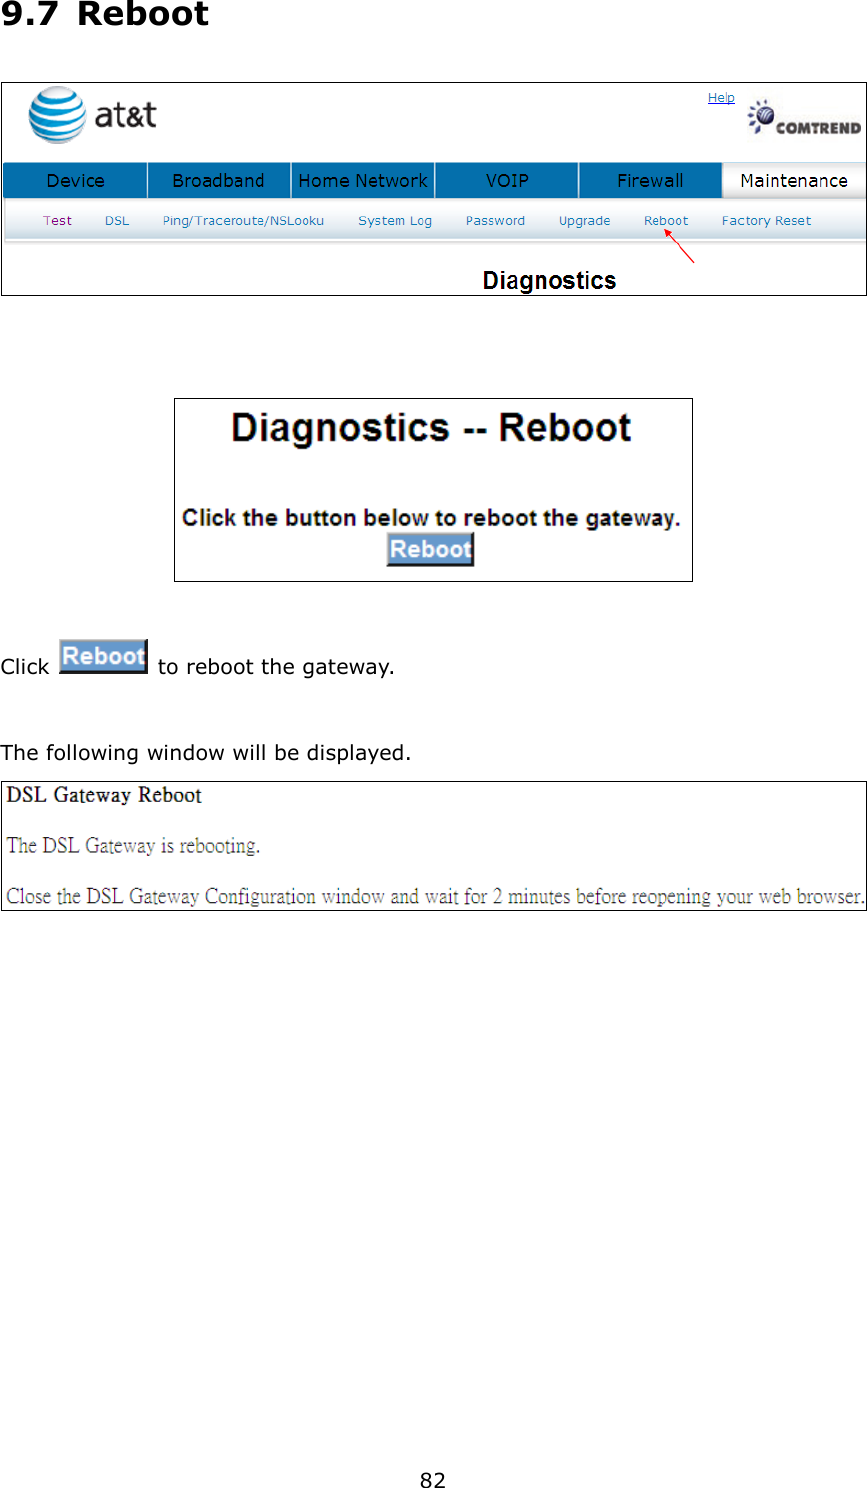 82 9.7  Reboot    Click    to reboot the gateway.  The following window will be displayed.    